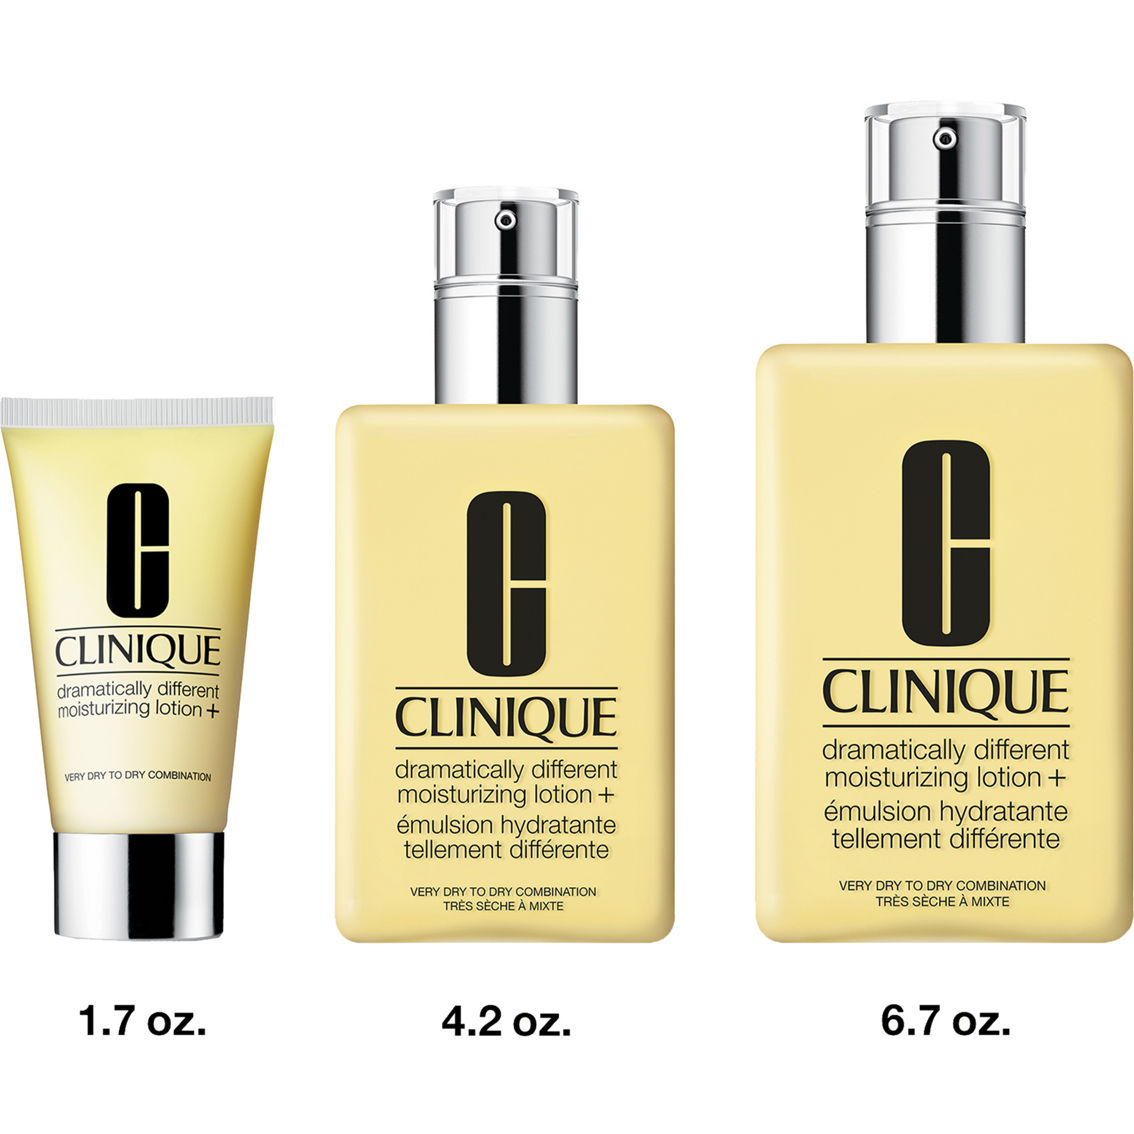 Clinique Dramatically Different Moisturizing Lotion+ - Image 2 of 7